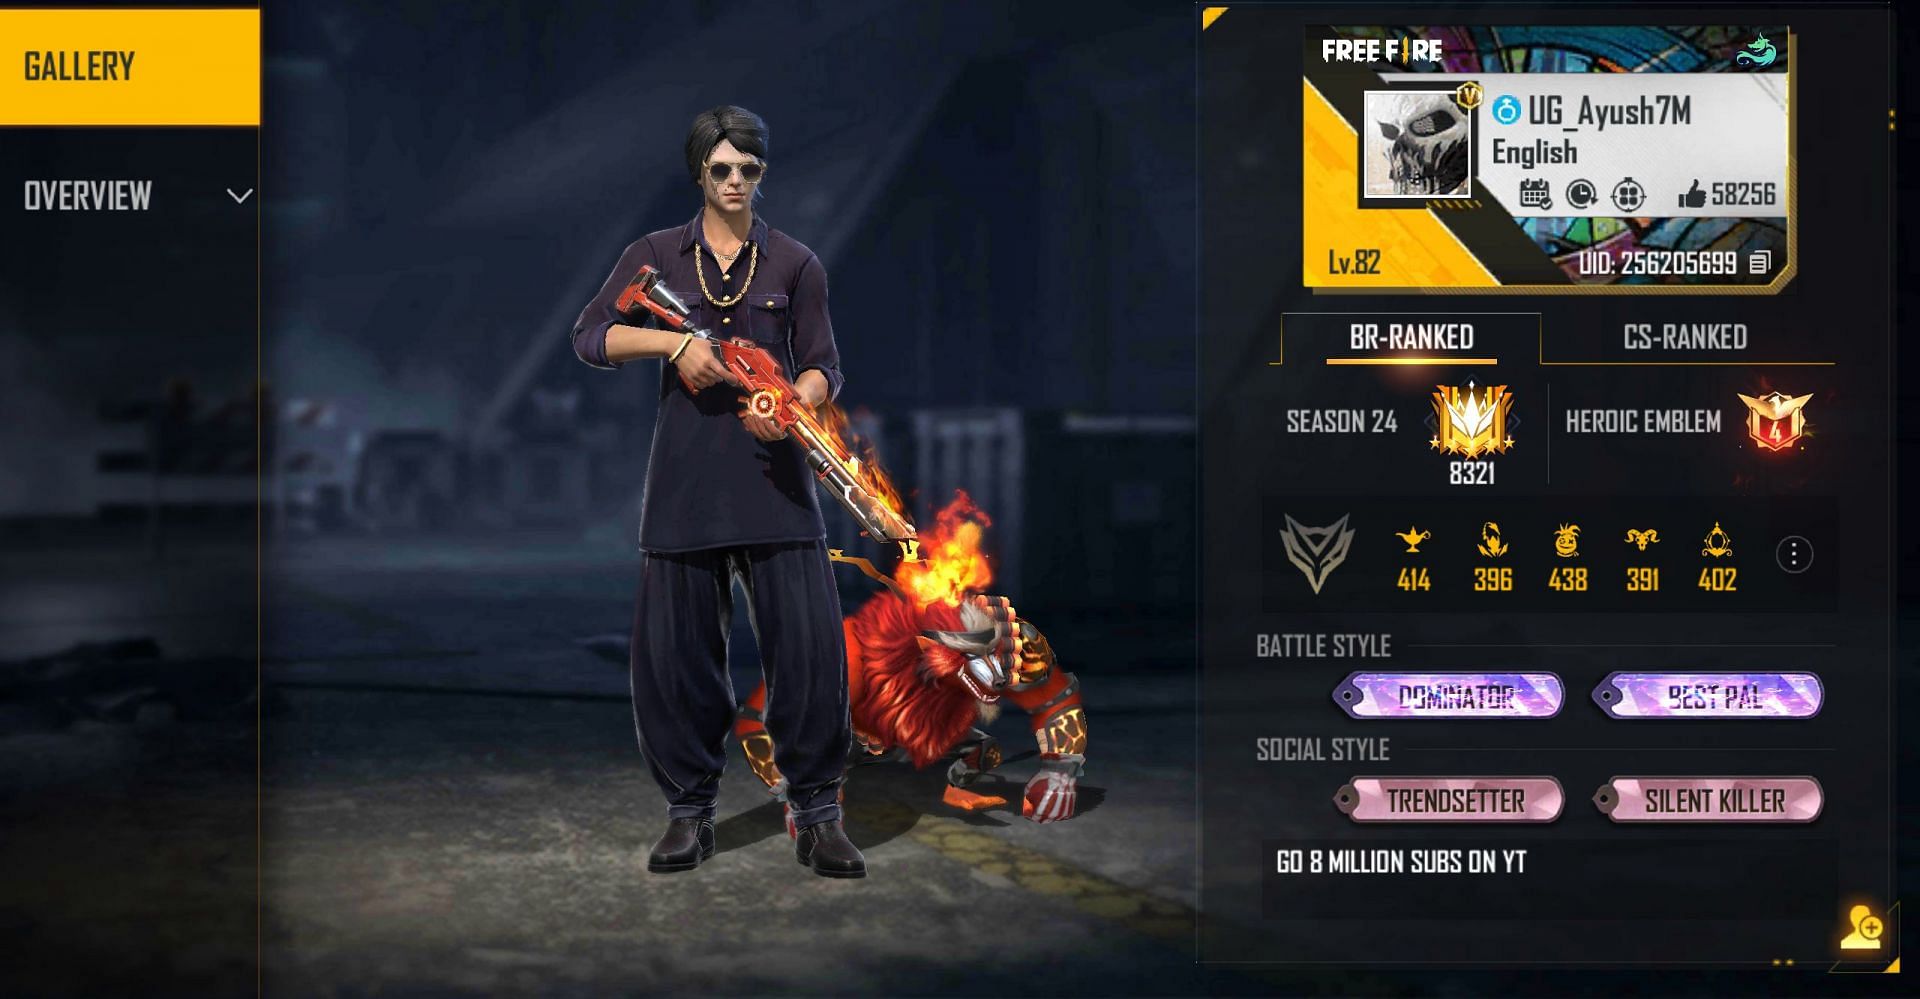 UnGraduate Gamer is popular among the Indian Free Fire players (Image via Free Fire)